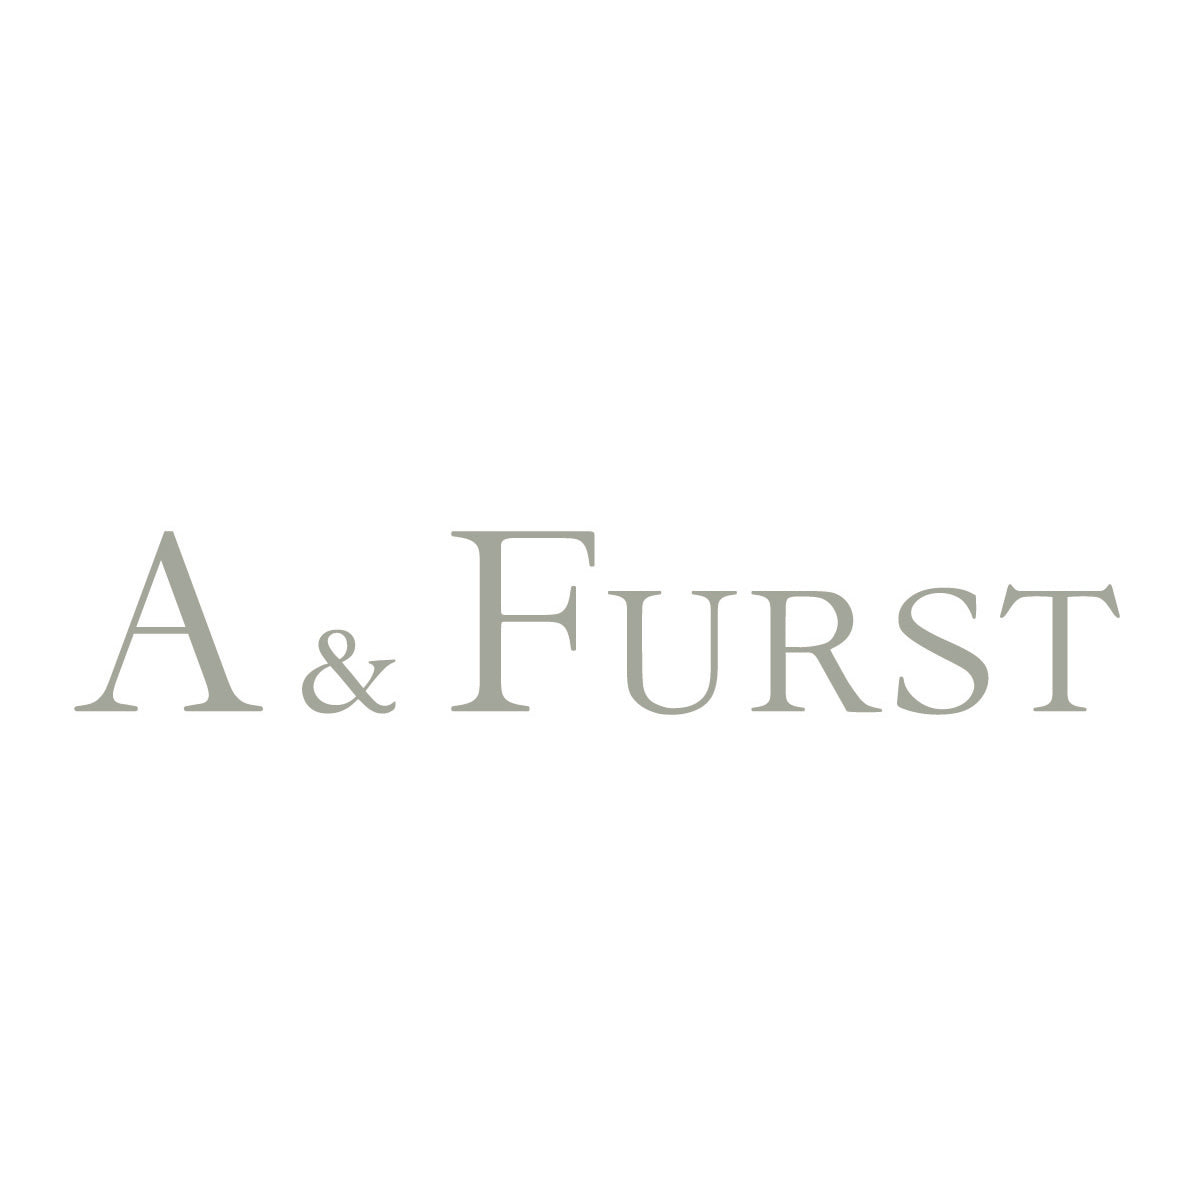 NEW! - A & Furst - Sole - Drop Earrings with Aquamarine and Swiss Blue Topaz, 18k Yellow Gold